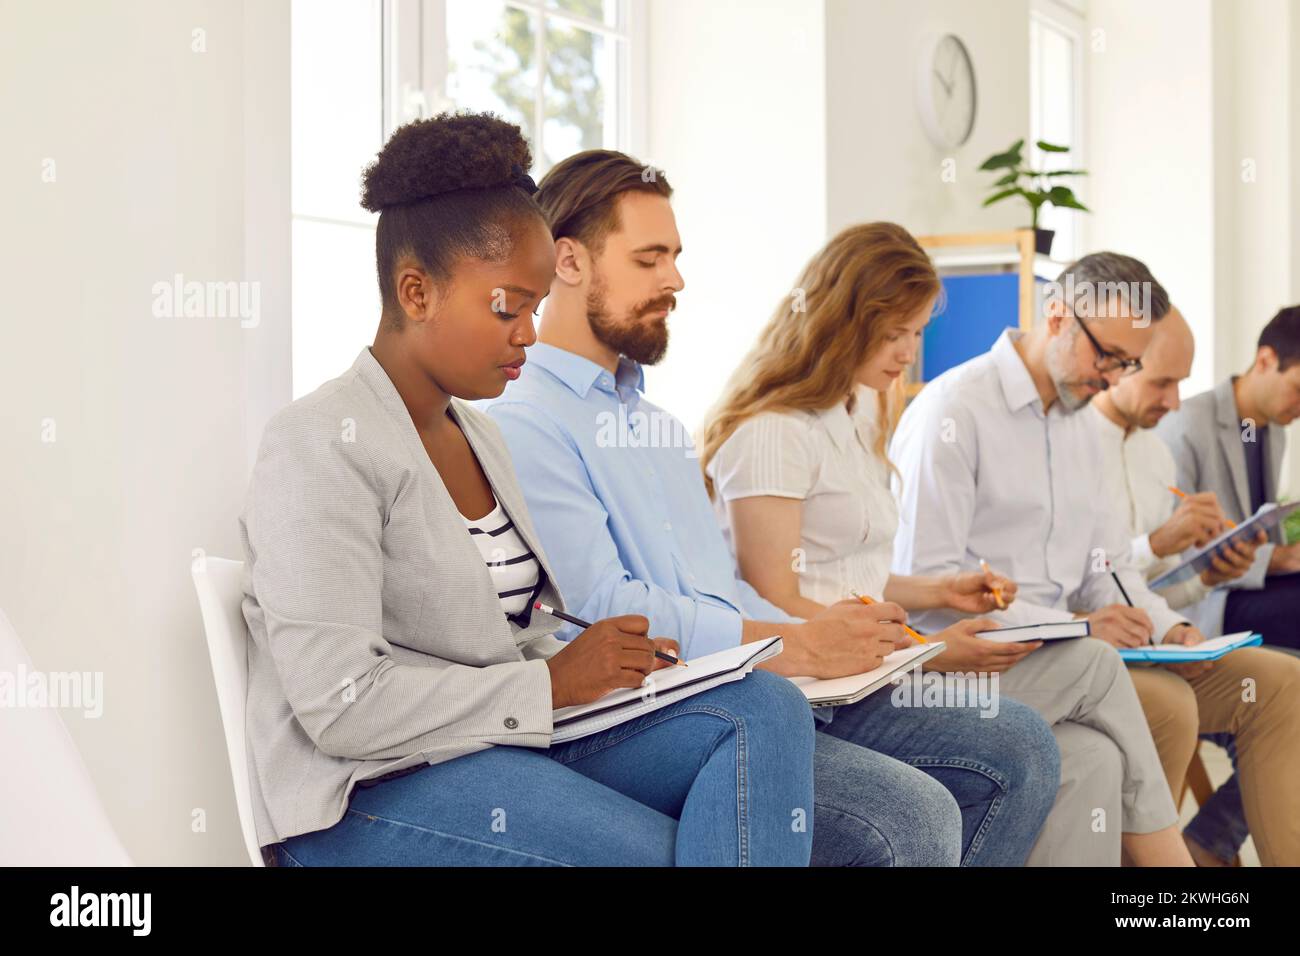 Diverse audience taking notes while listening to lecture at business conference Stock Photo